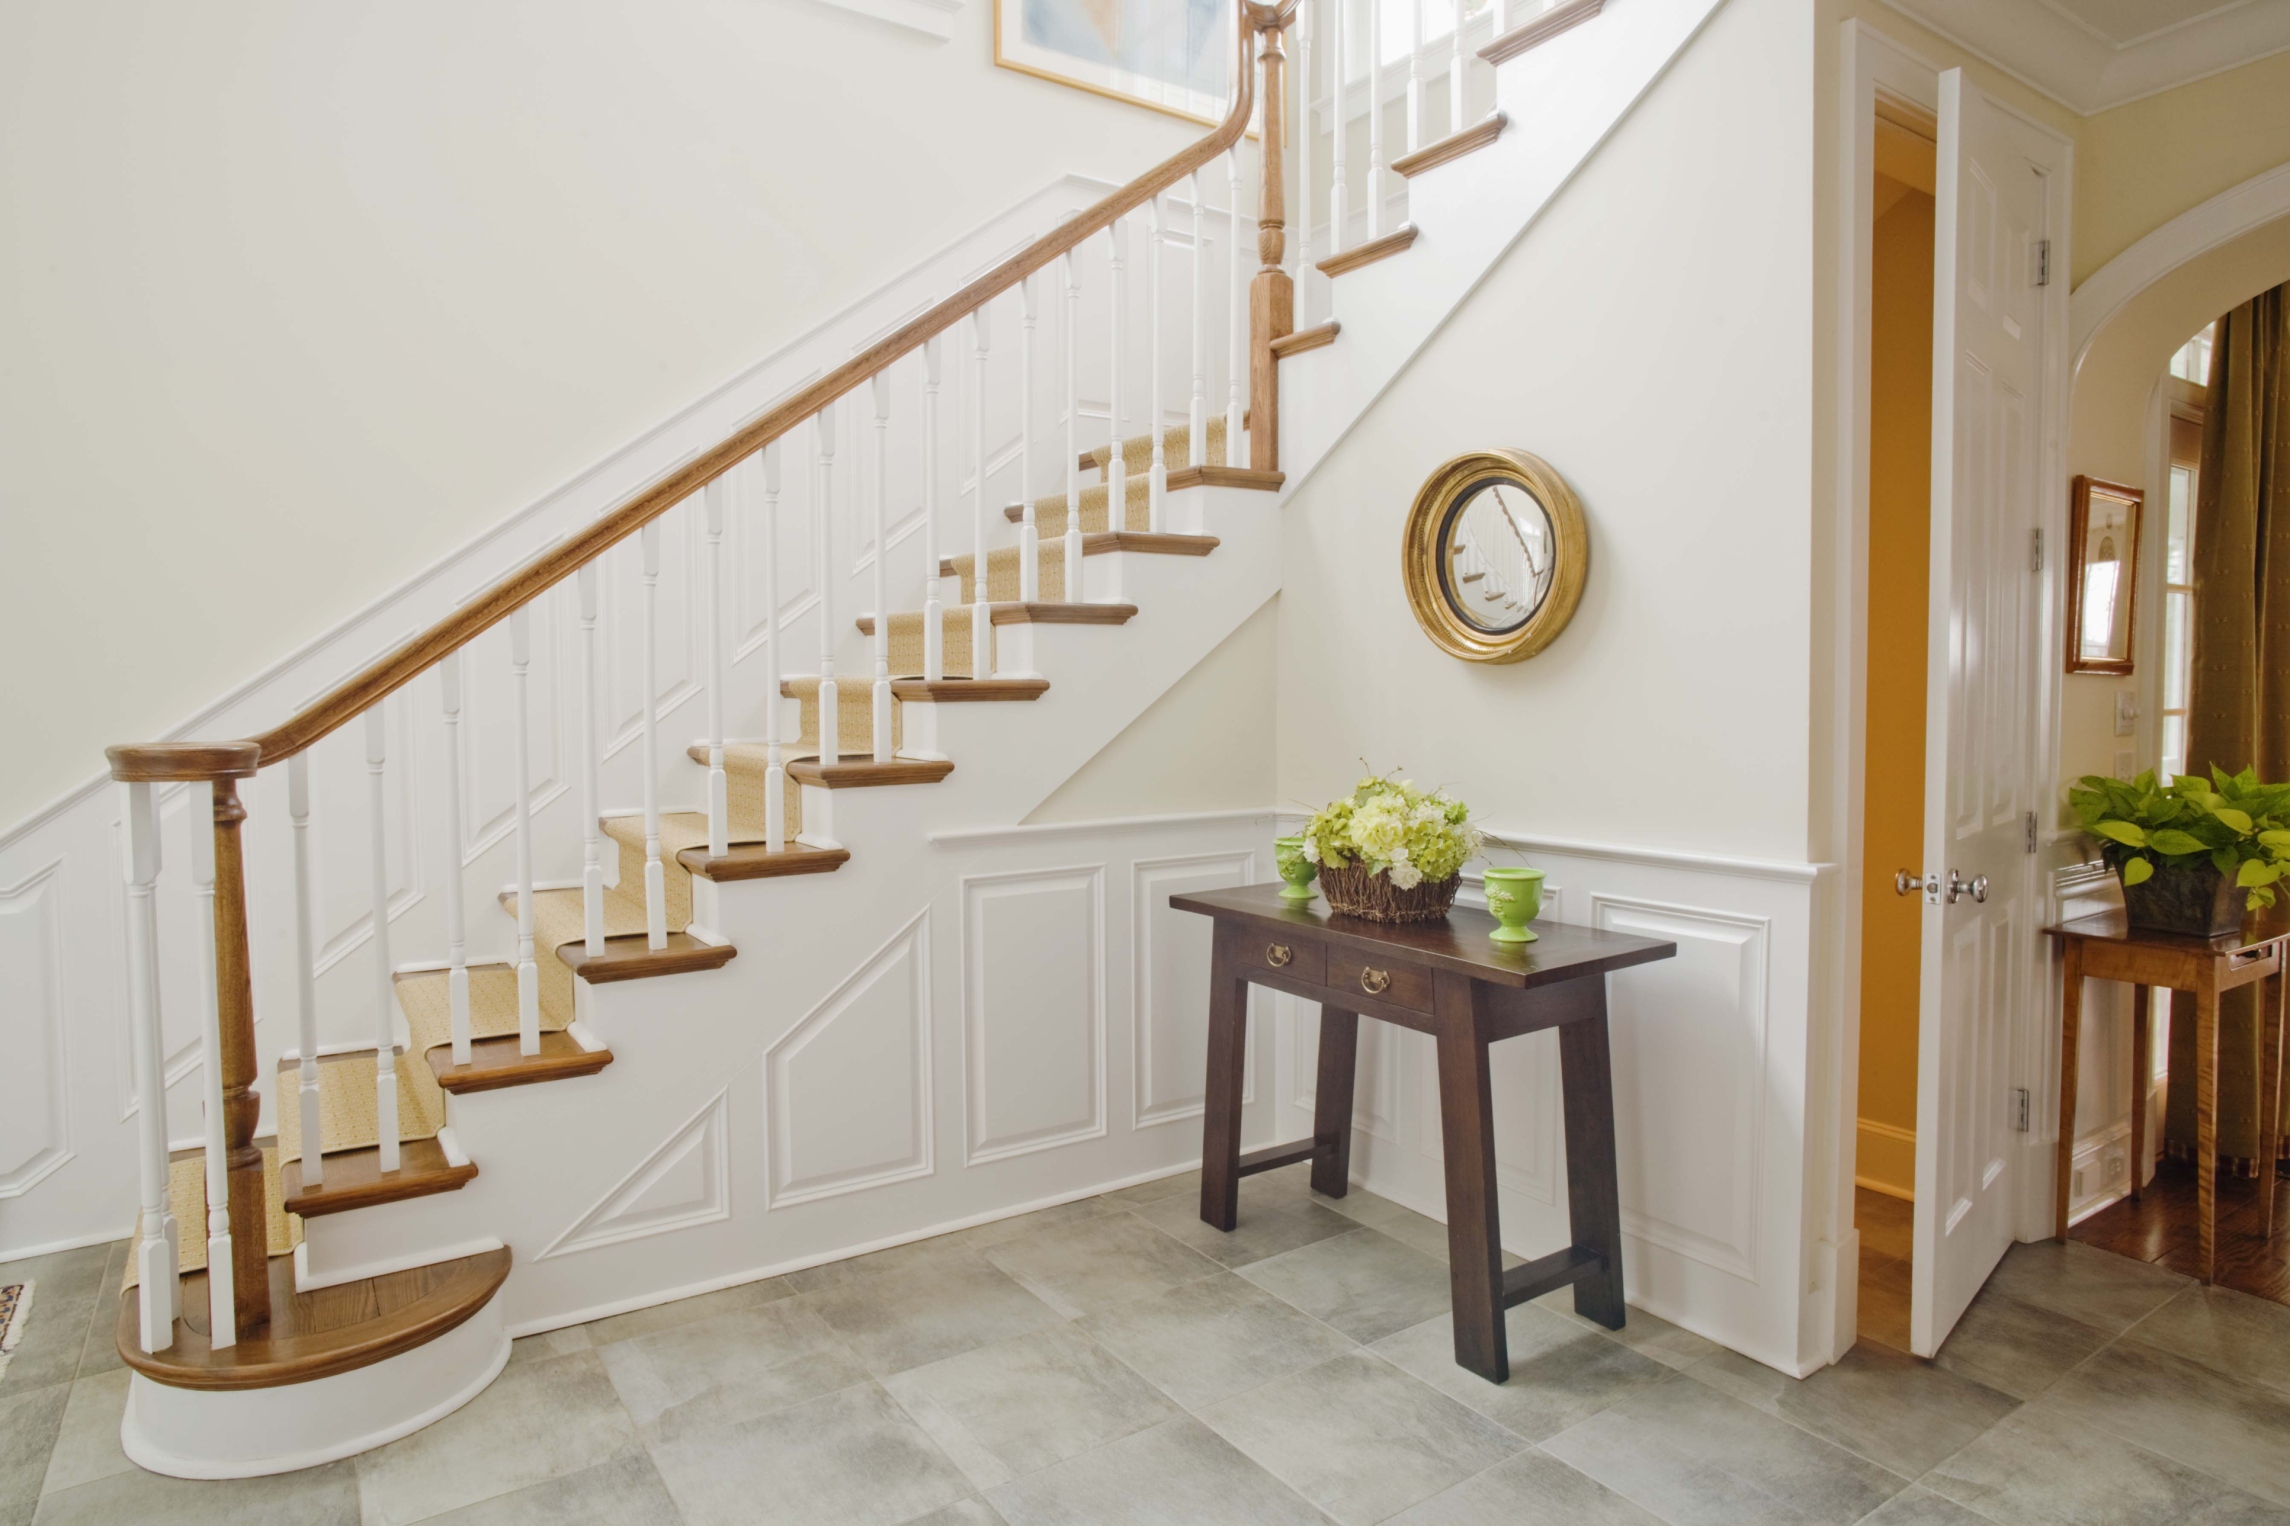 The Parts of a Staircase & Standard Stair Measurements